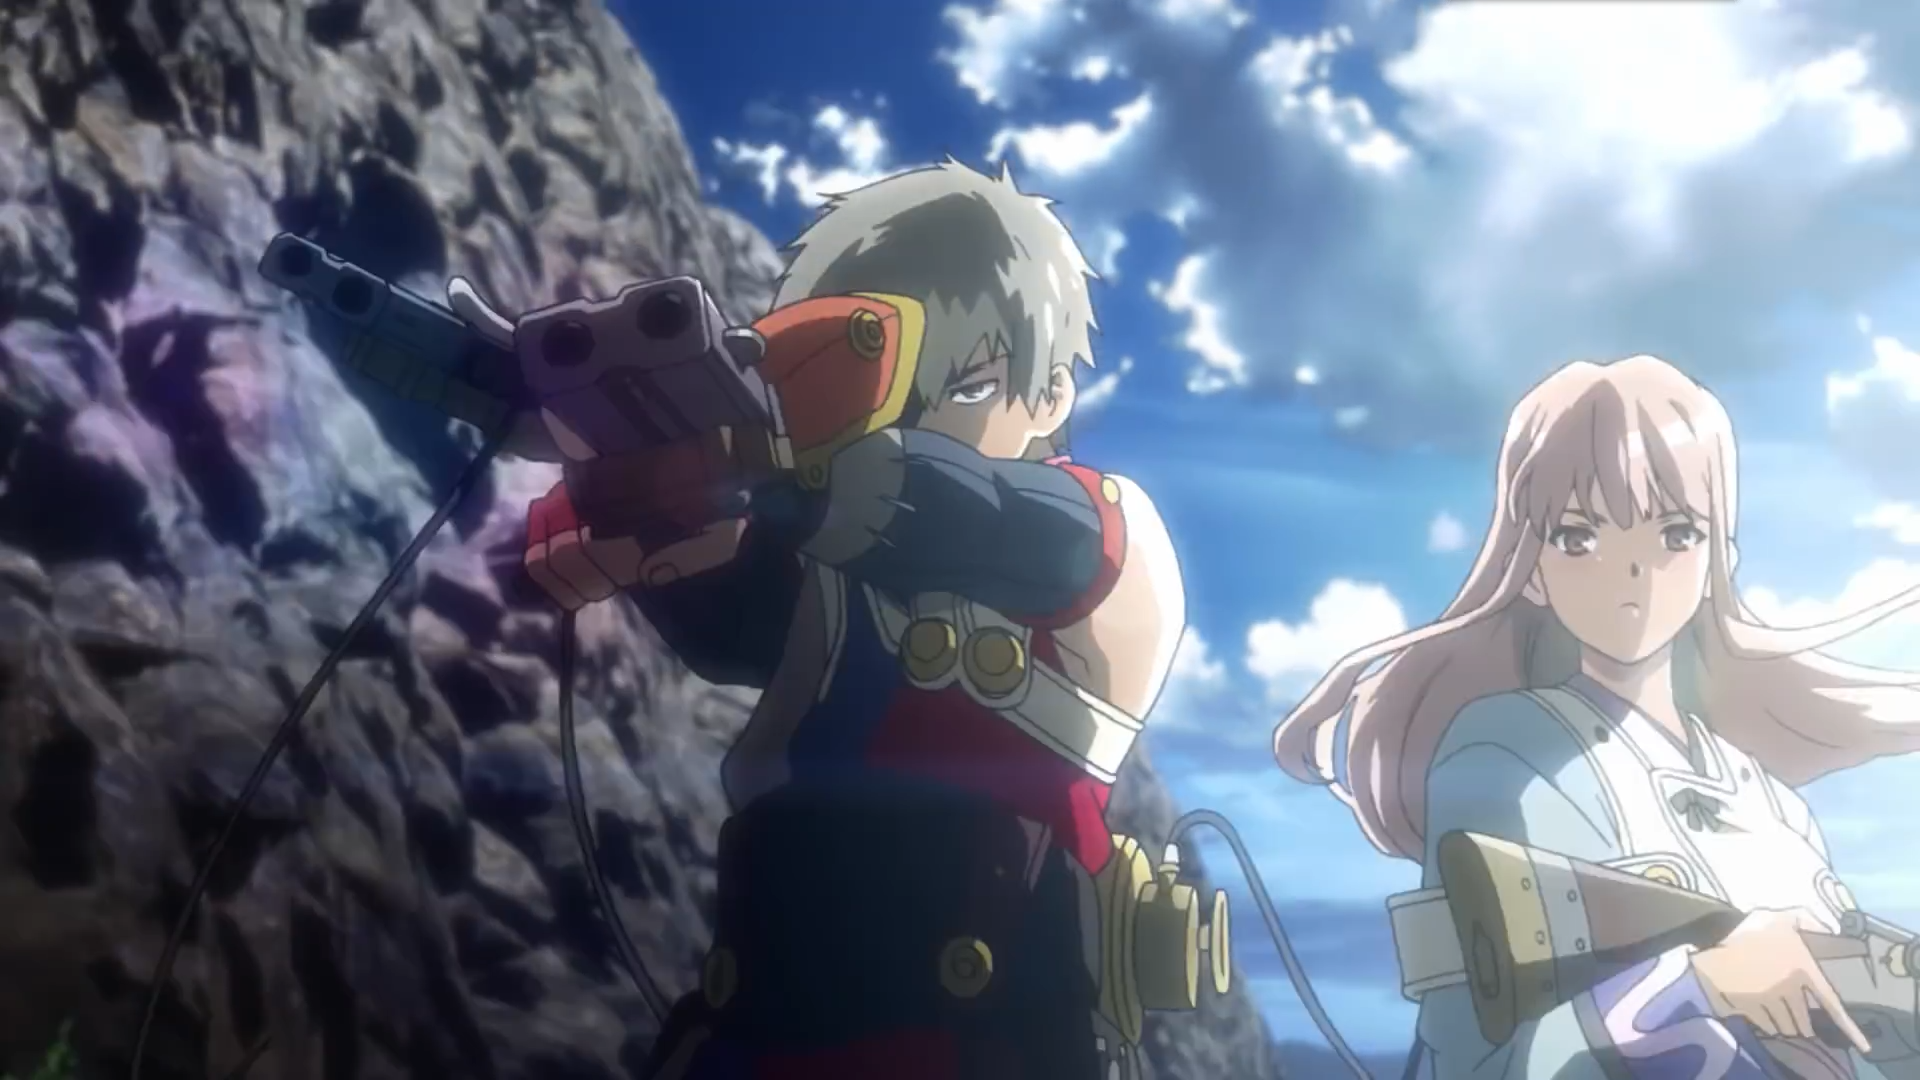 Kabaneri of the Iron Fortress Mobile Game to Shut Down in February 2021